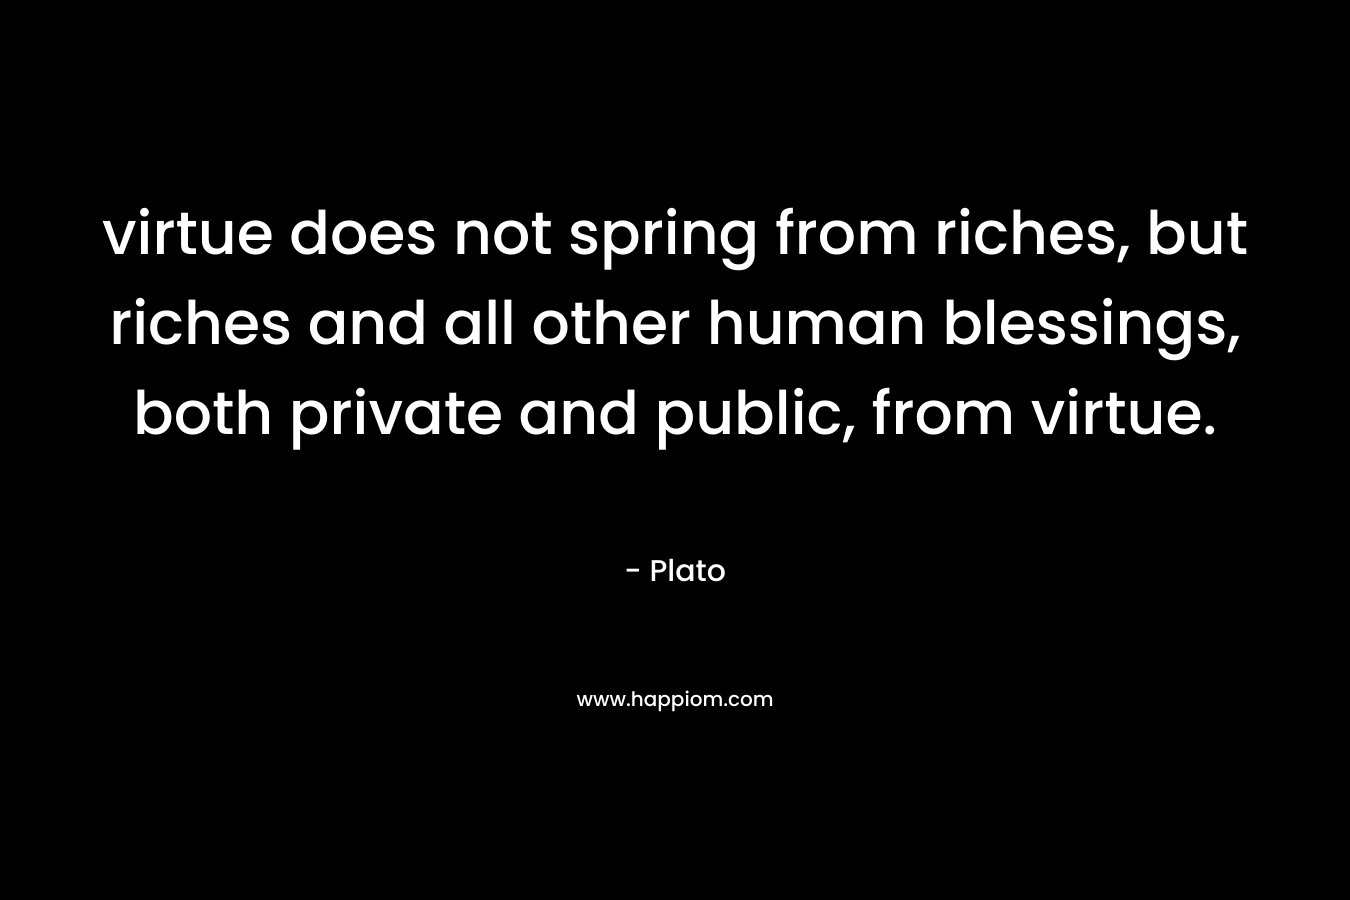 virtue does not spring from riches, but riches and all other human blessings, both private and public, from virtue. – Plato